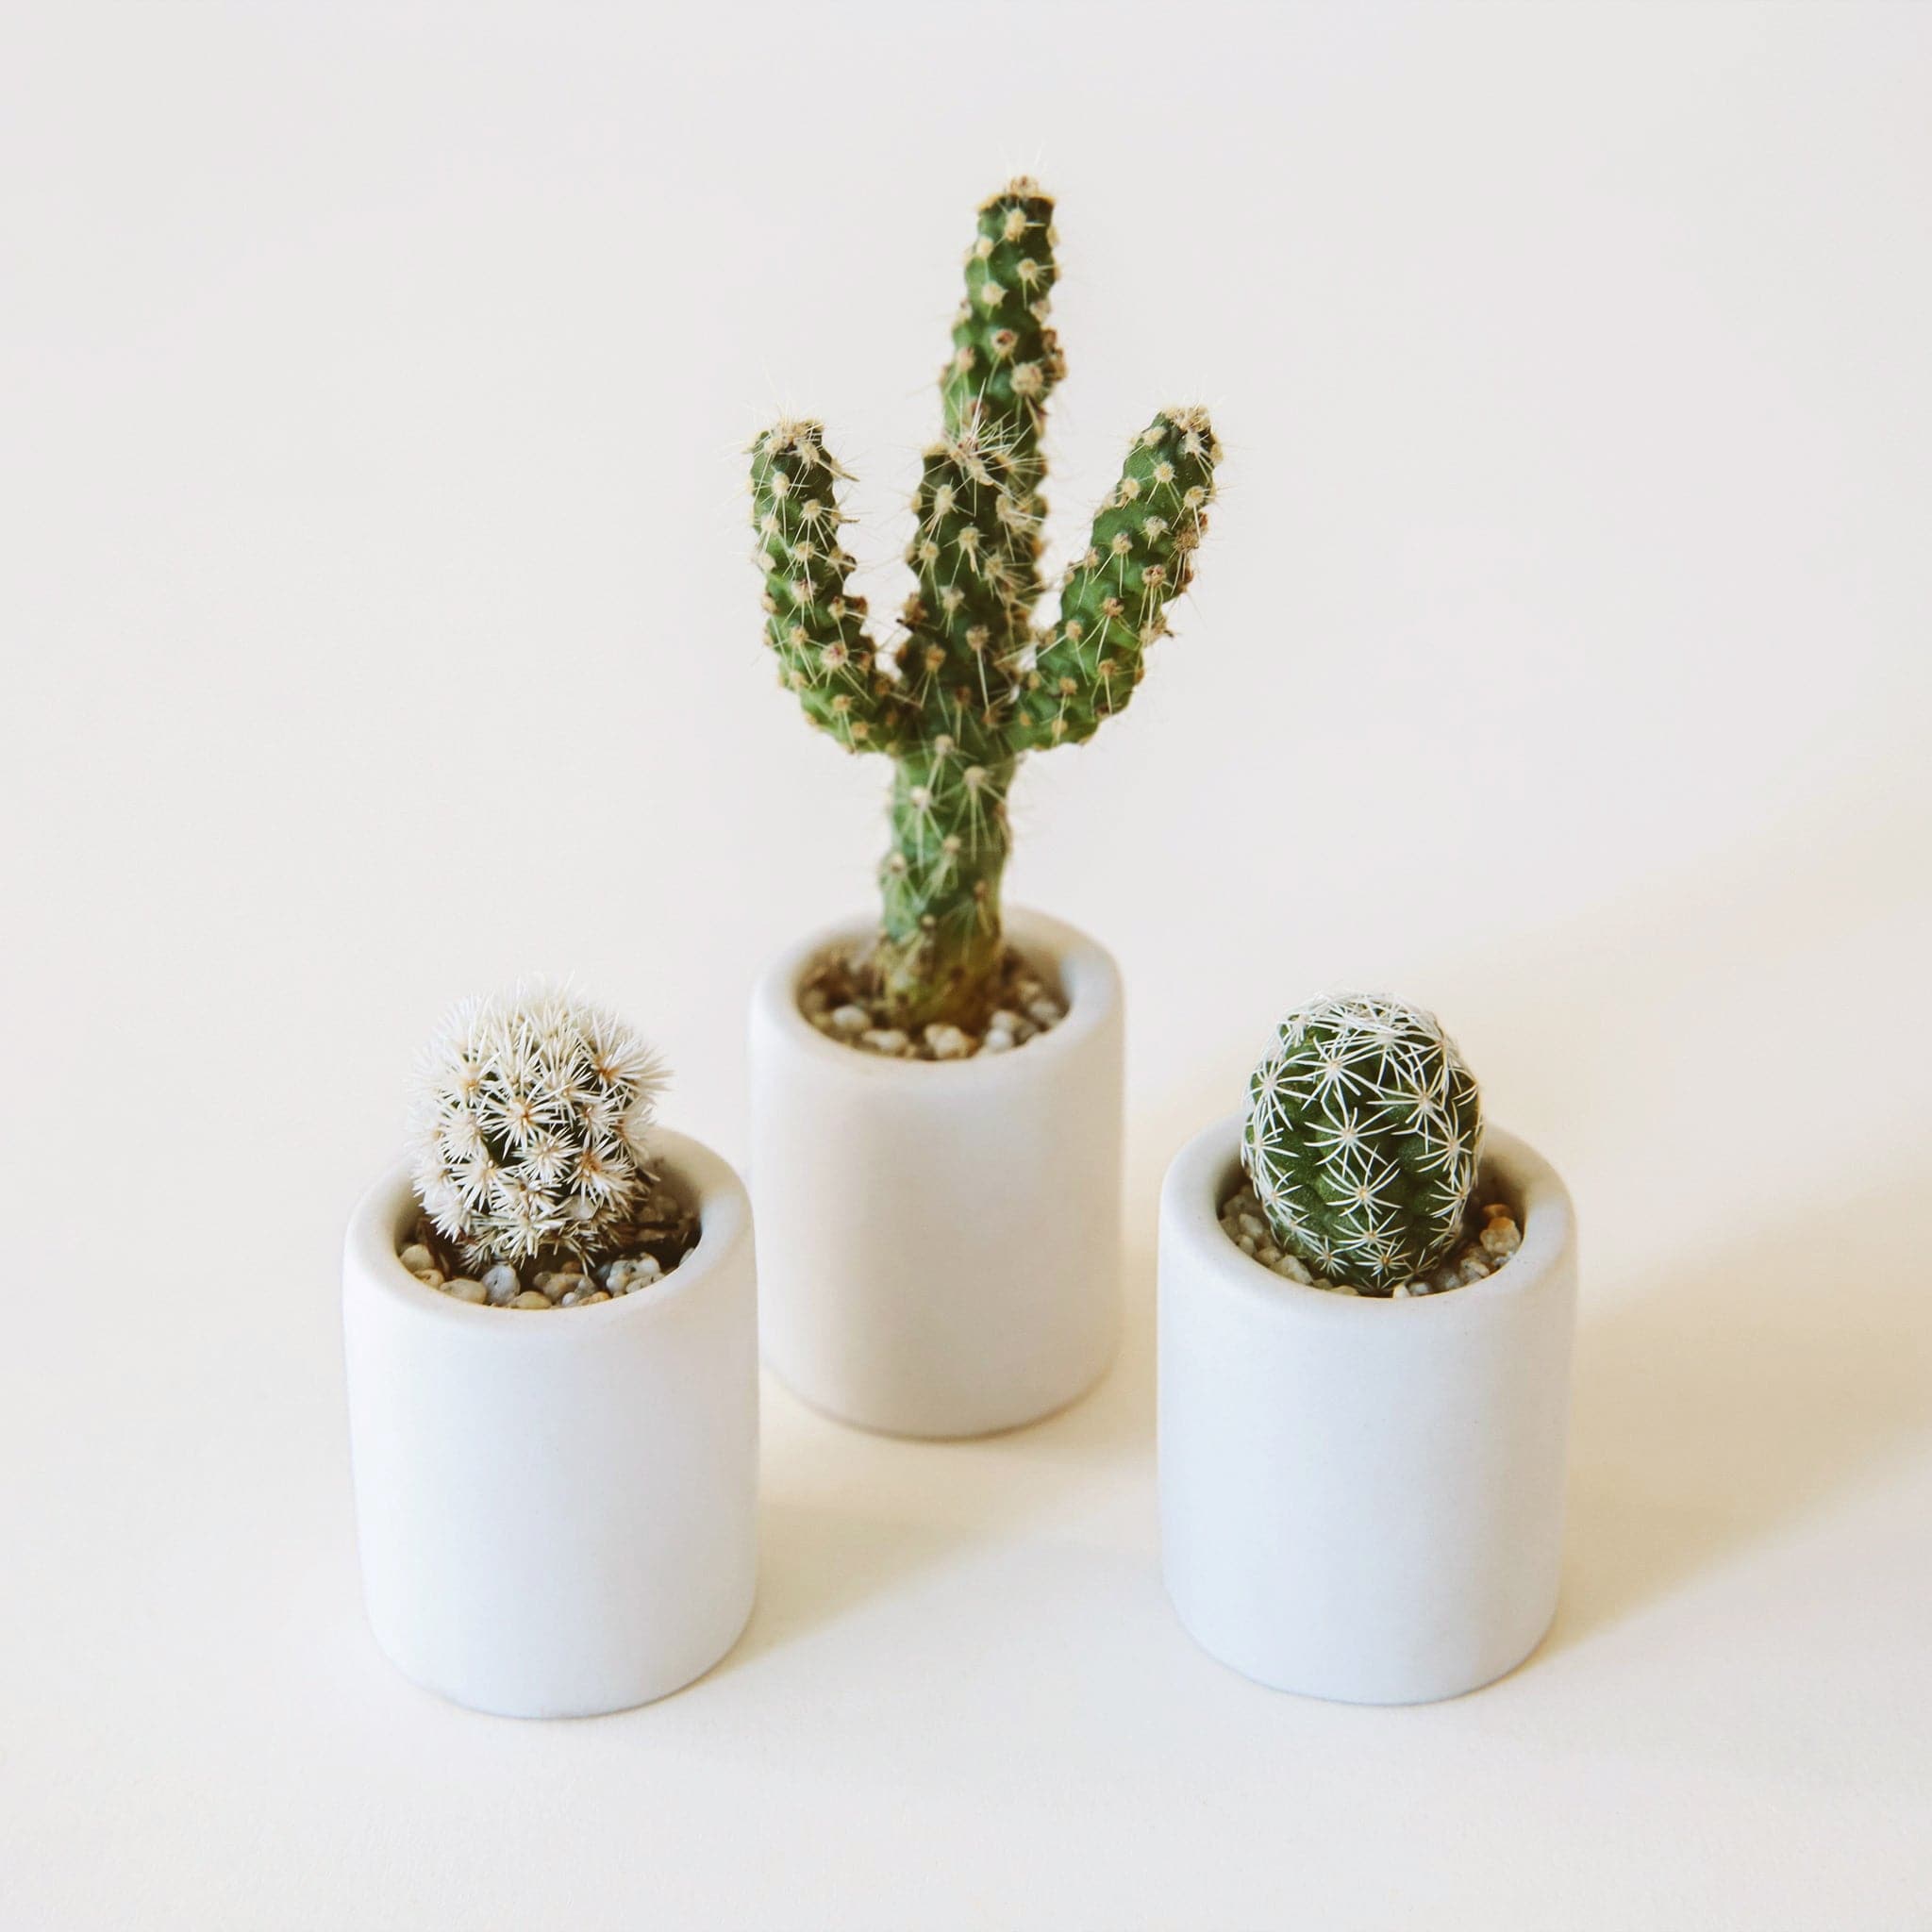 This white ceramic tiny pot is only an inch high, and has a smooth ceramic matte finish. Featured are some succulent cuttings potted in each little vessel.